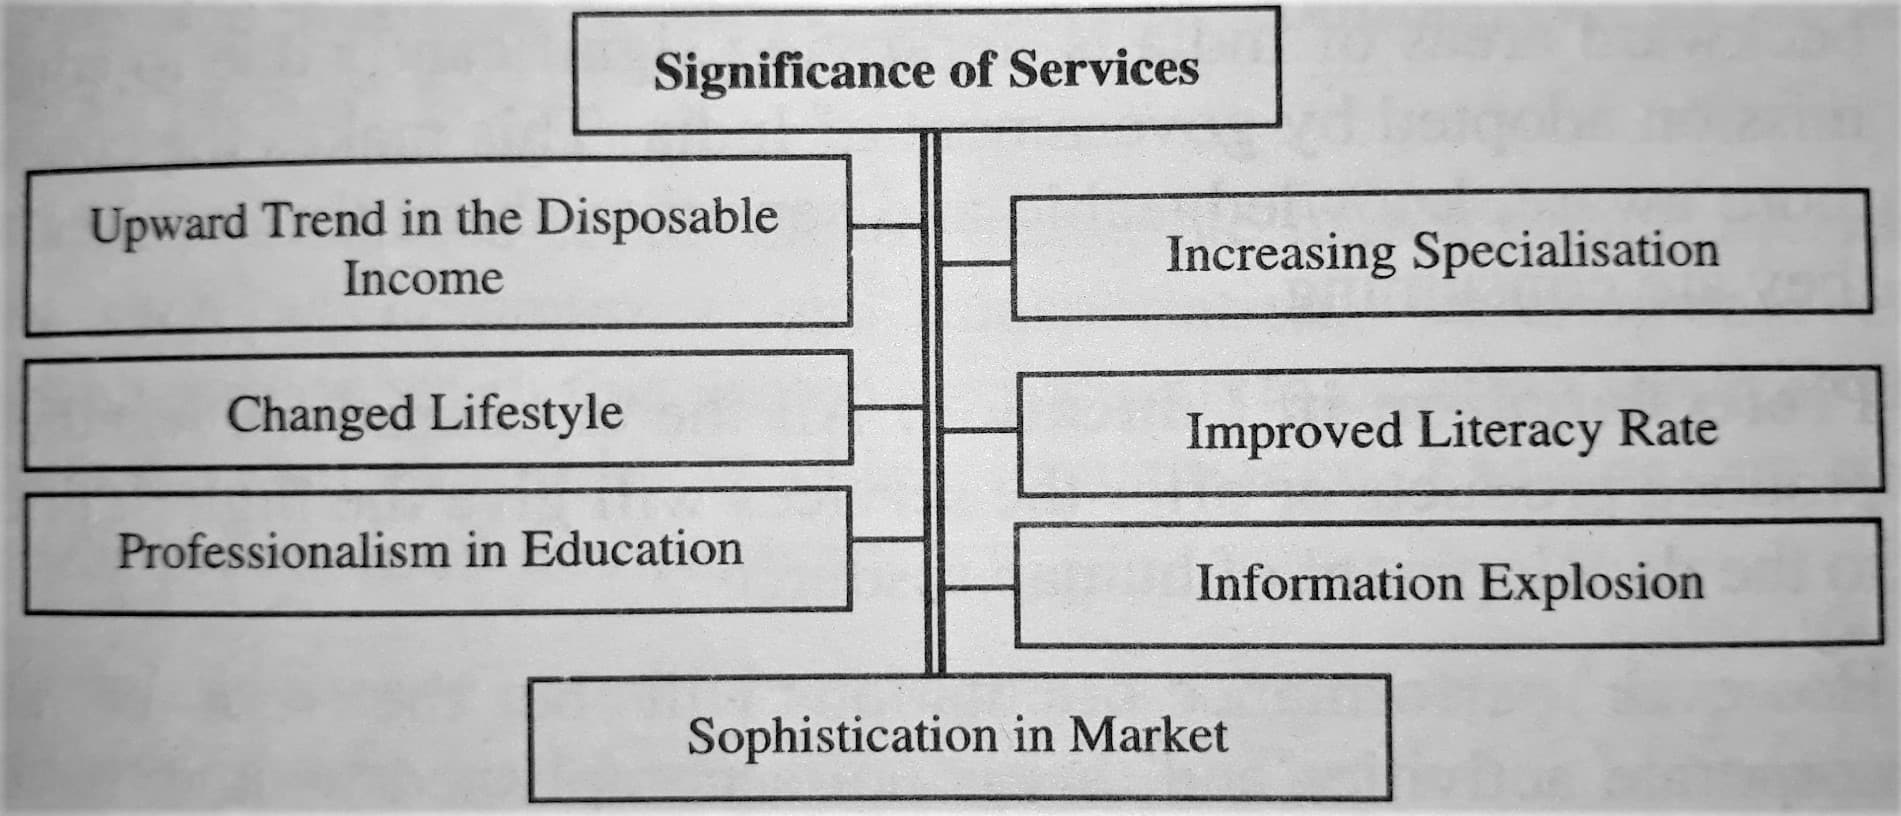 Significance of Services